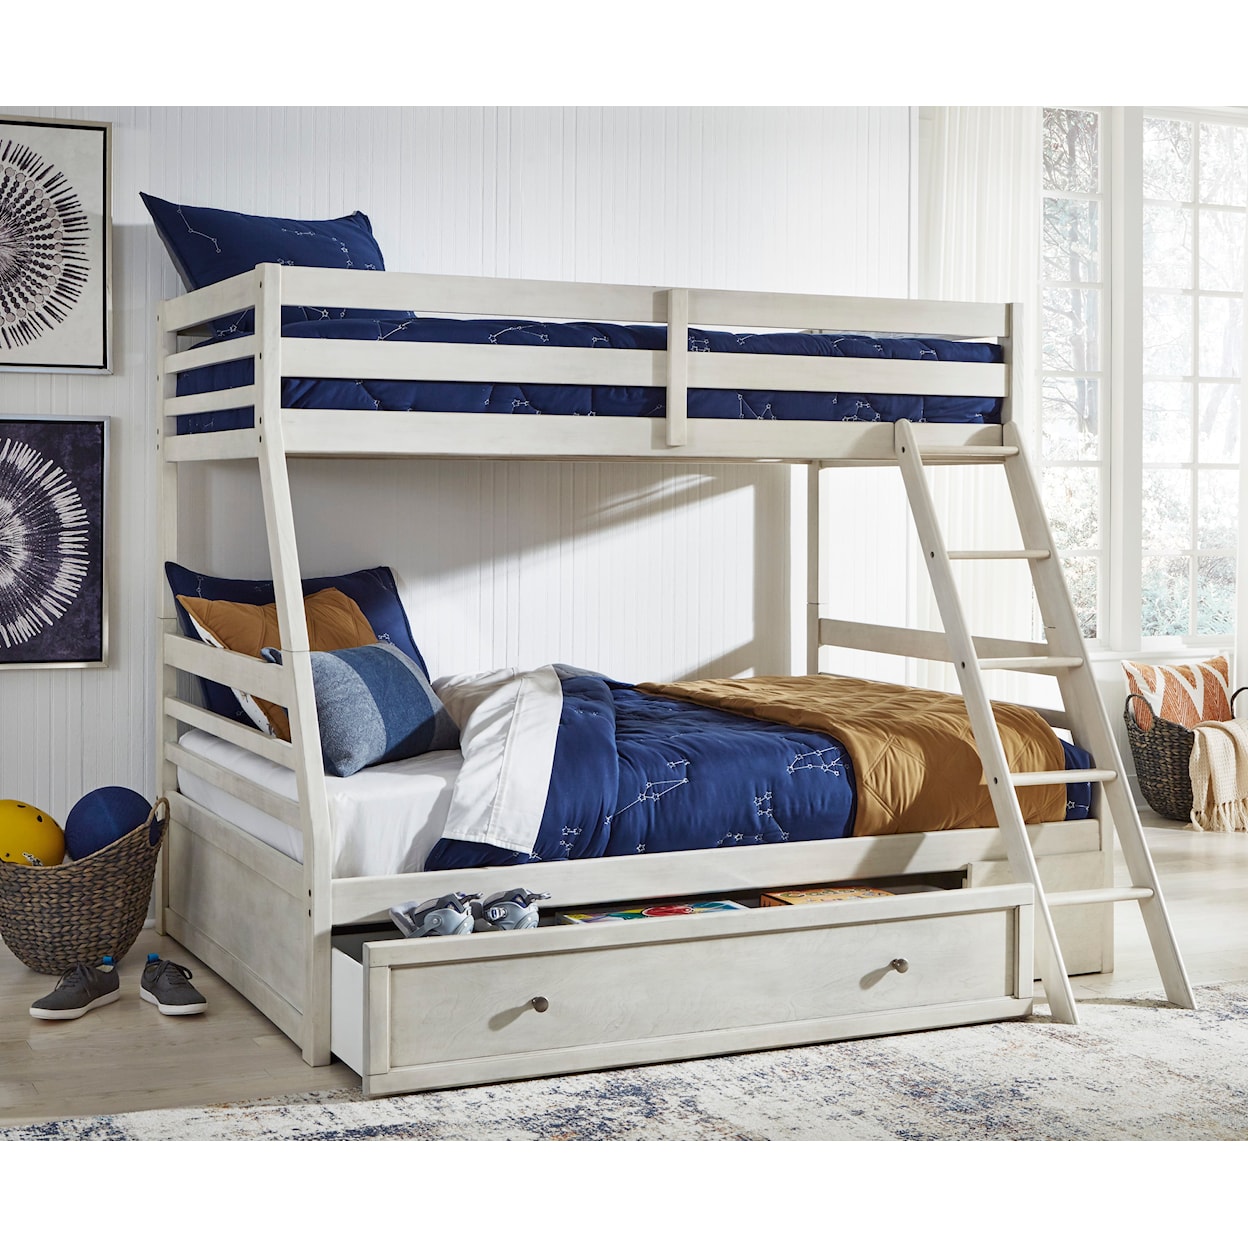 Ashley Signature Design Robbinsdale Twin/Full Bunk with Storage